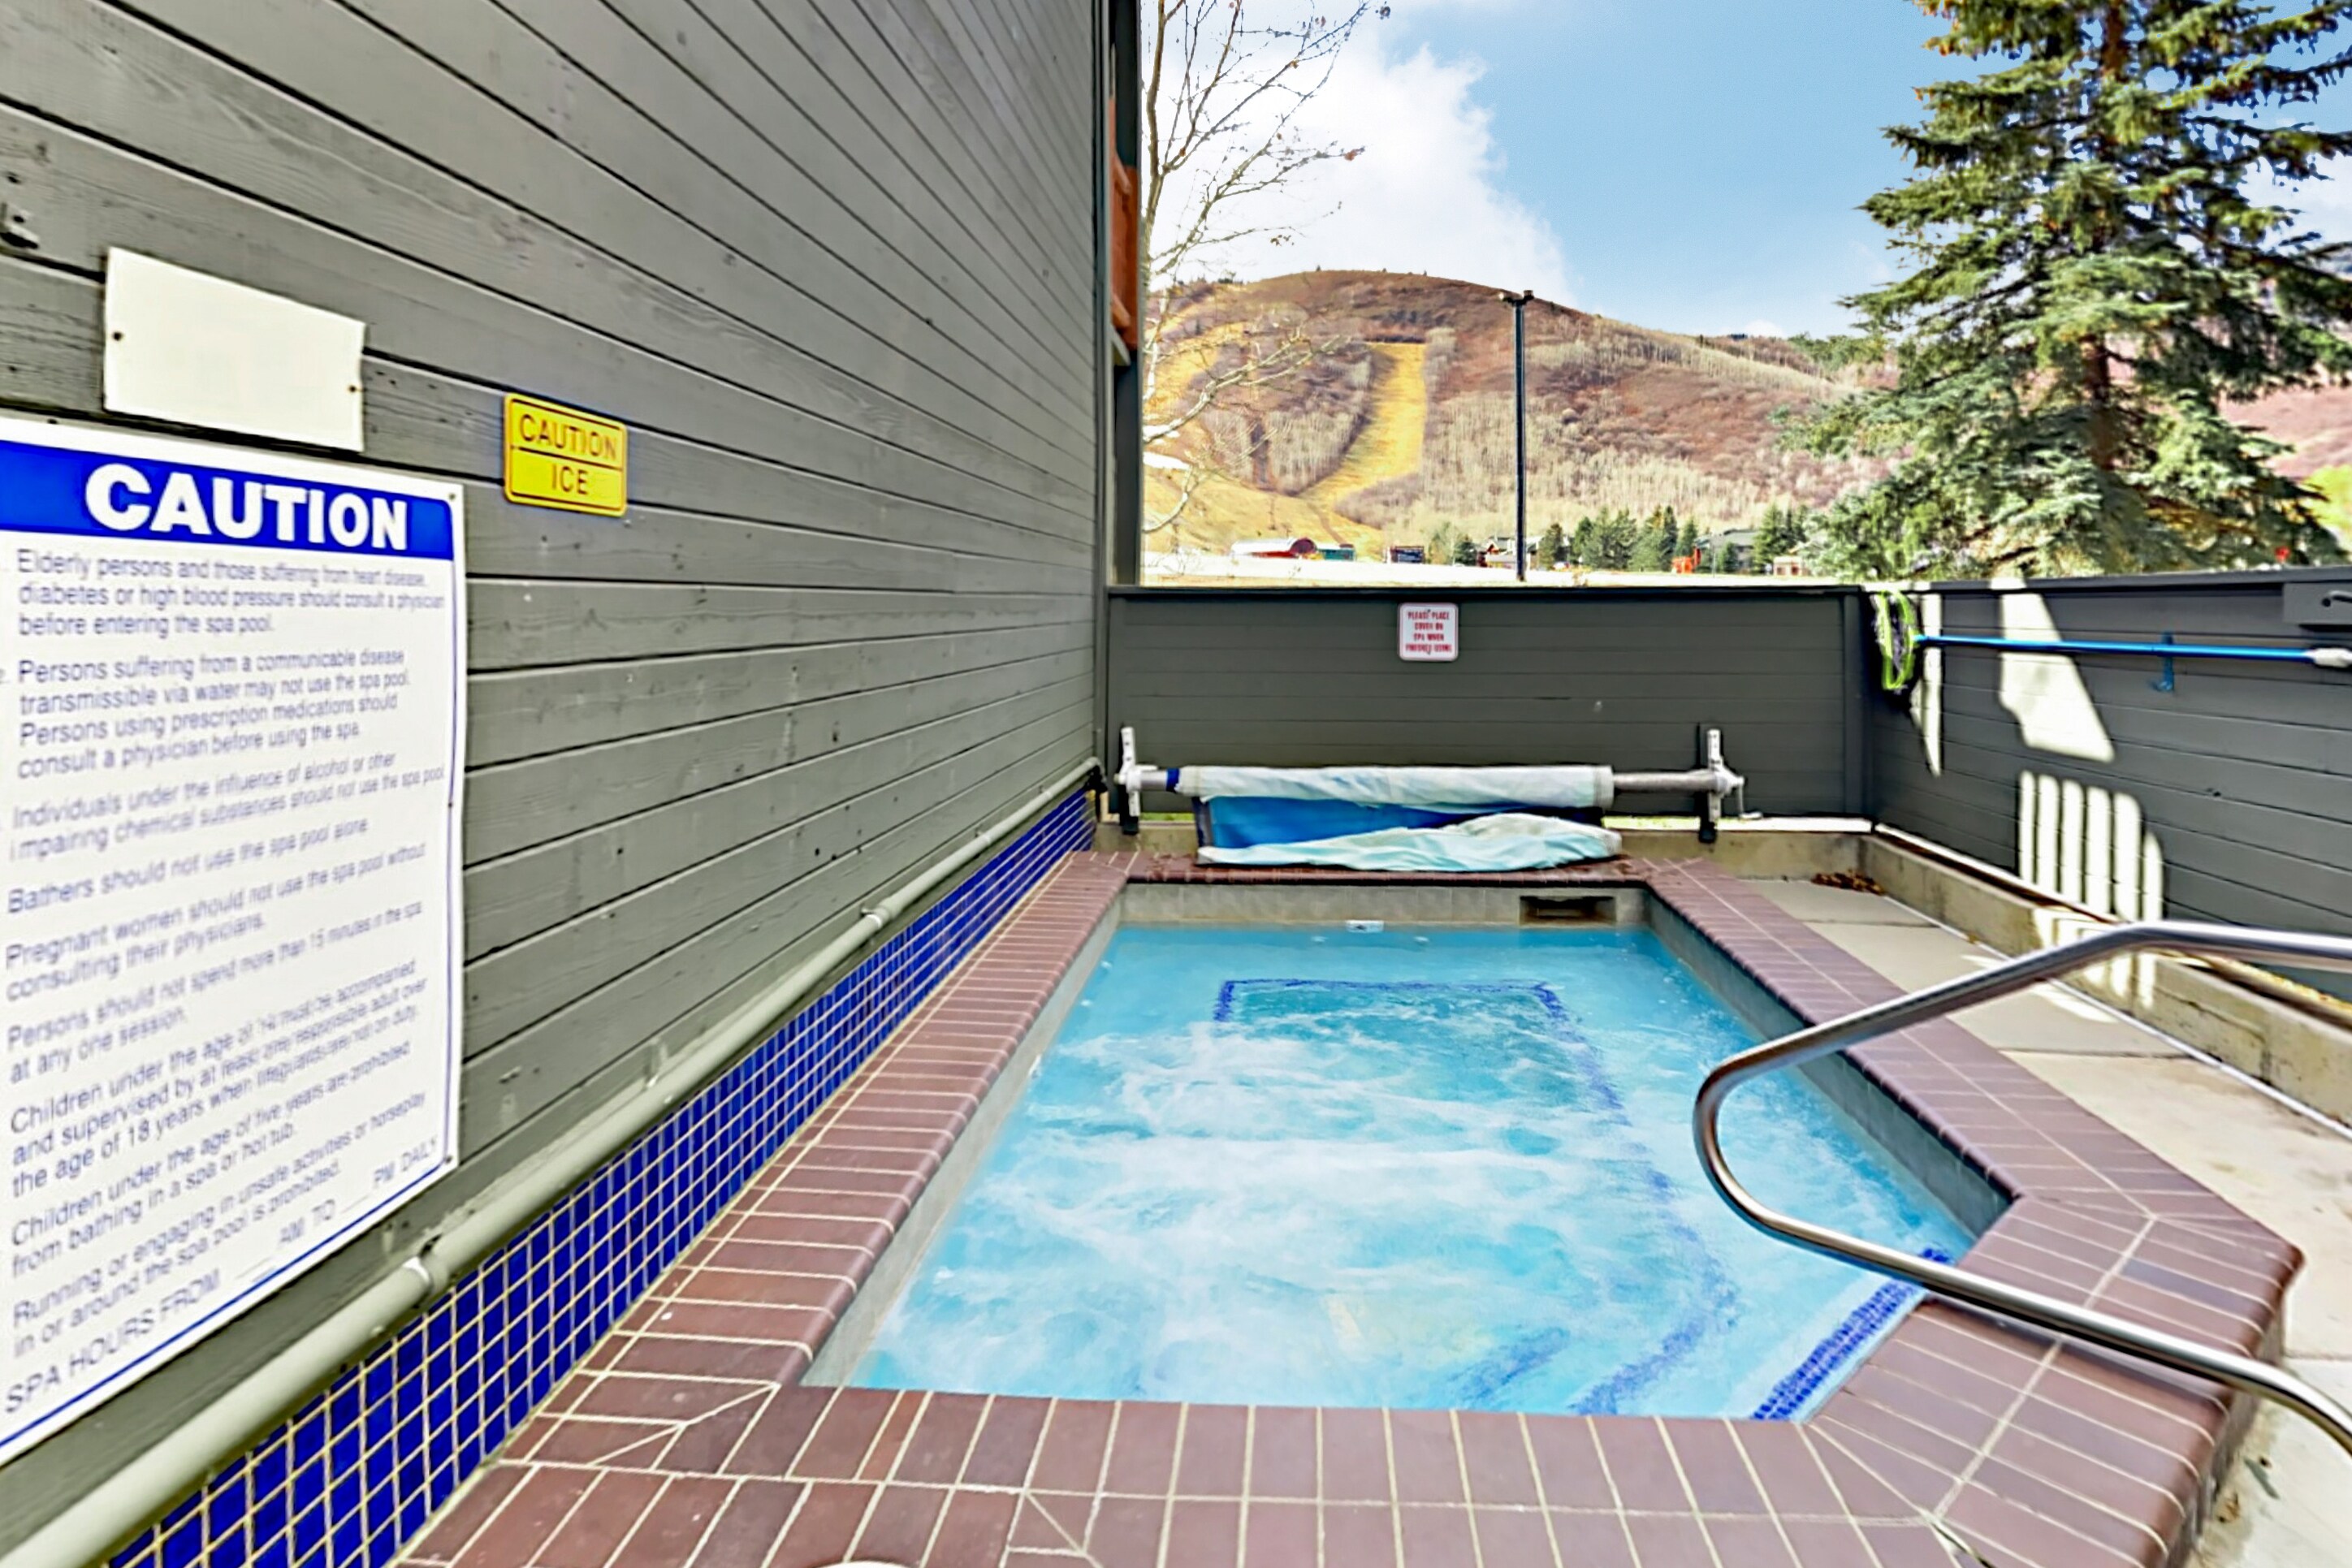 Relax in the bubbling hot tub with mountain views.